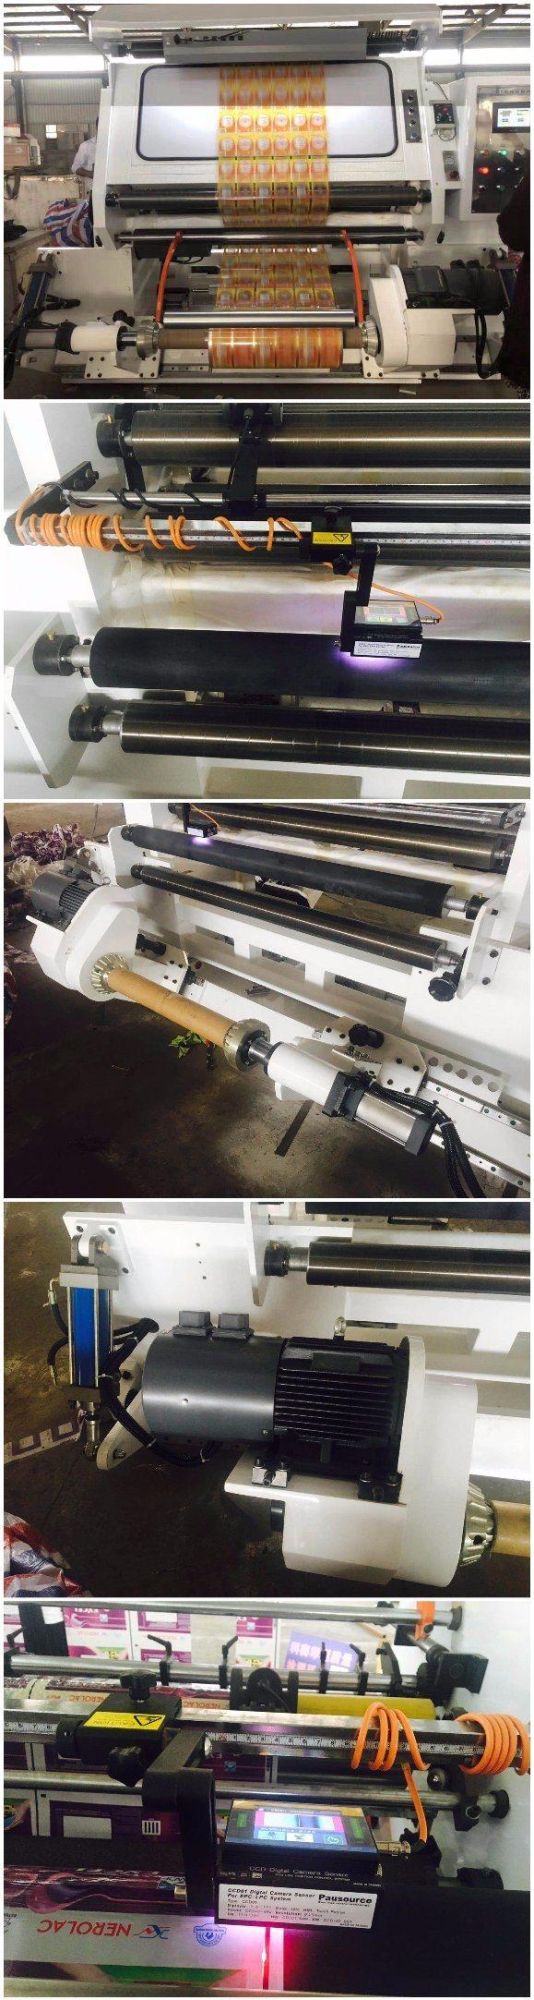 Inspecting and Rewinding Machine for Plastic Film, Foil, Paper and Adhesive Tape